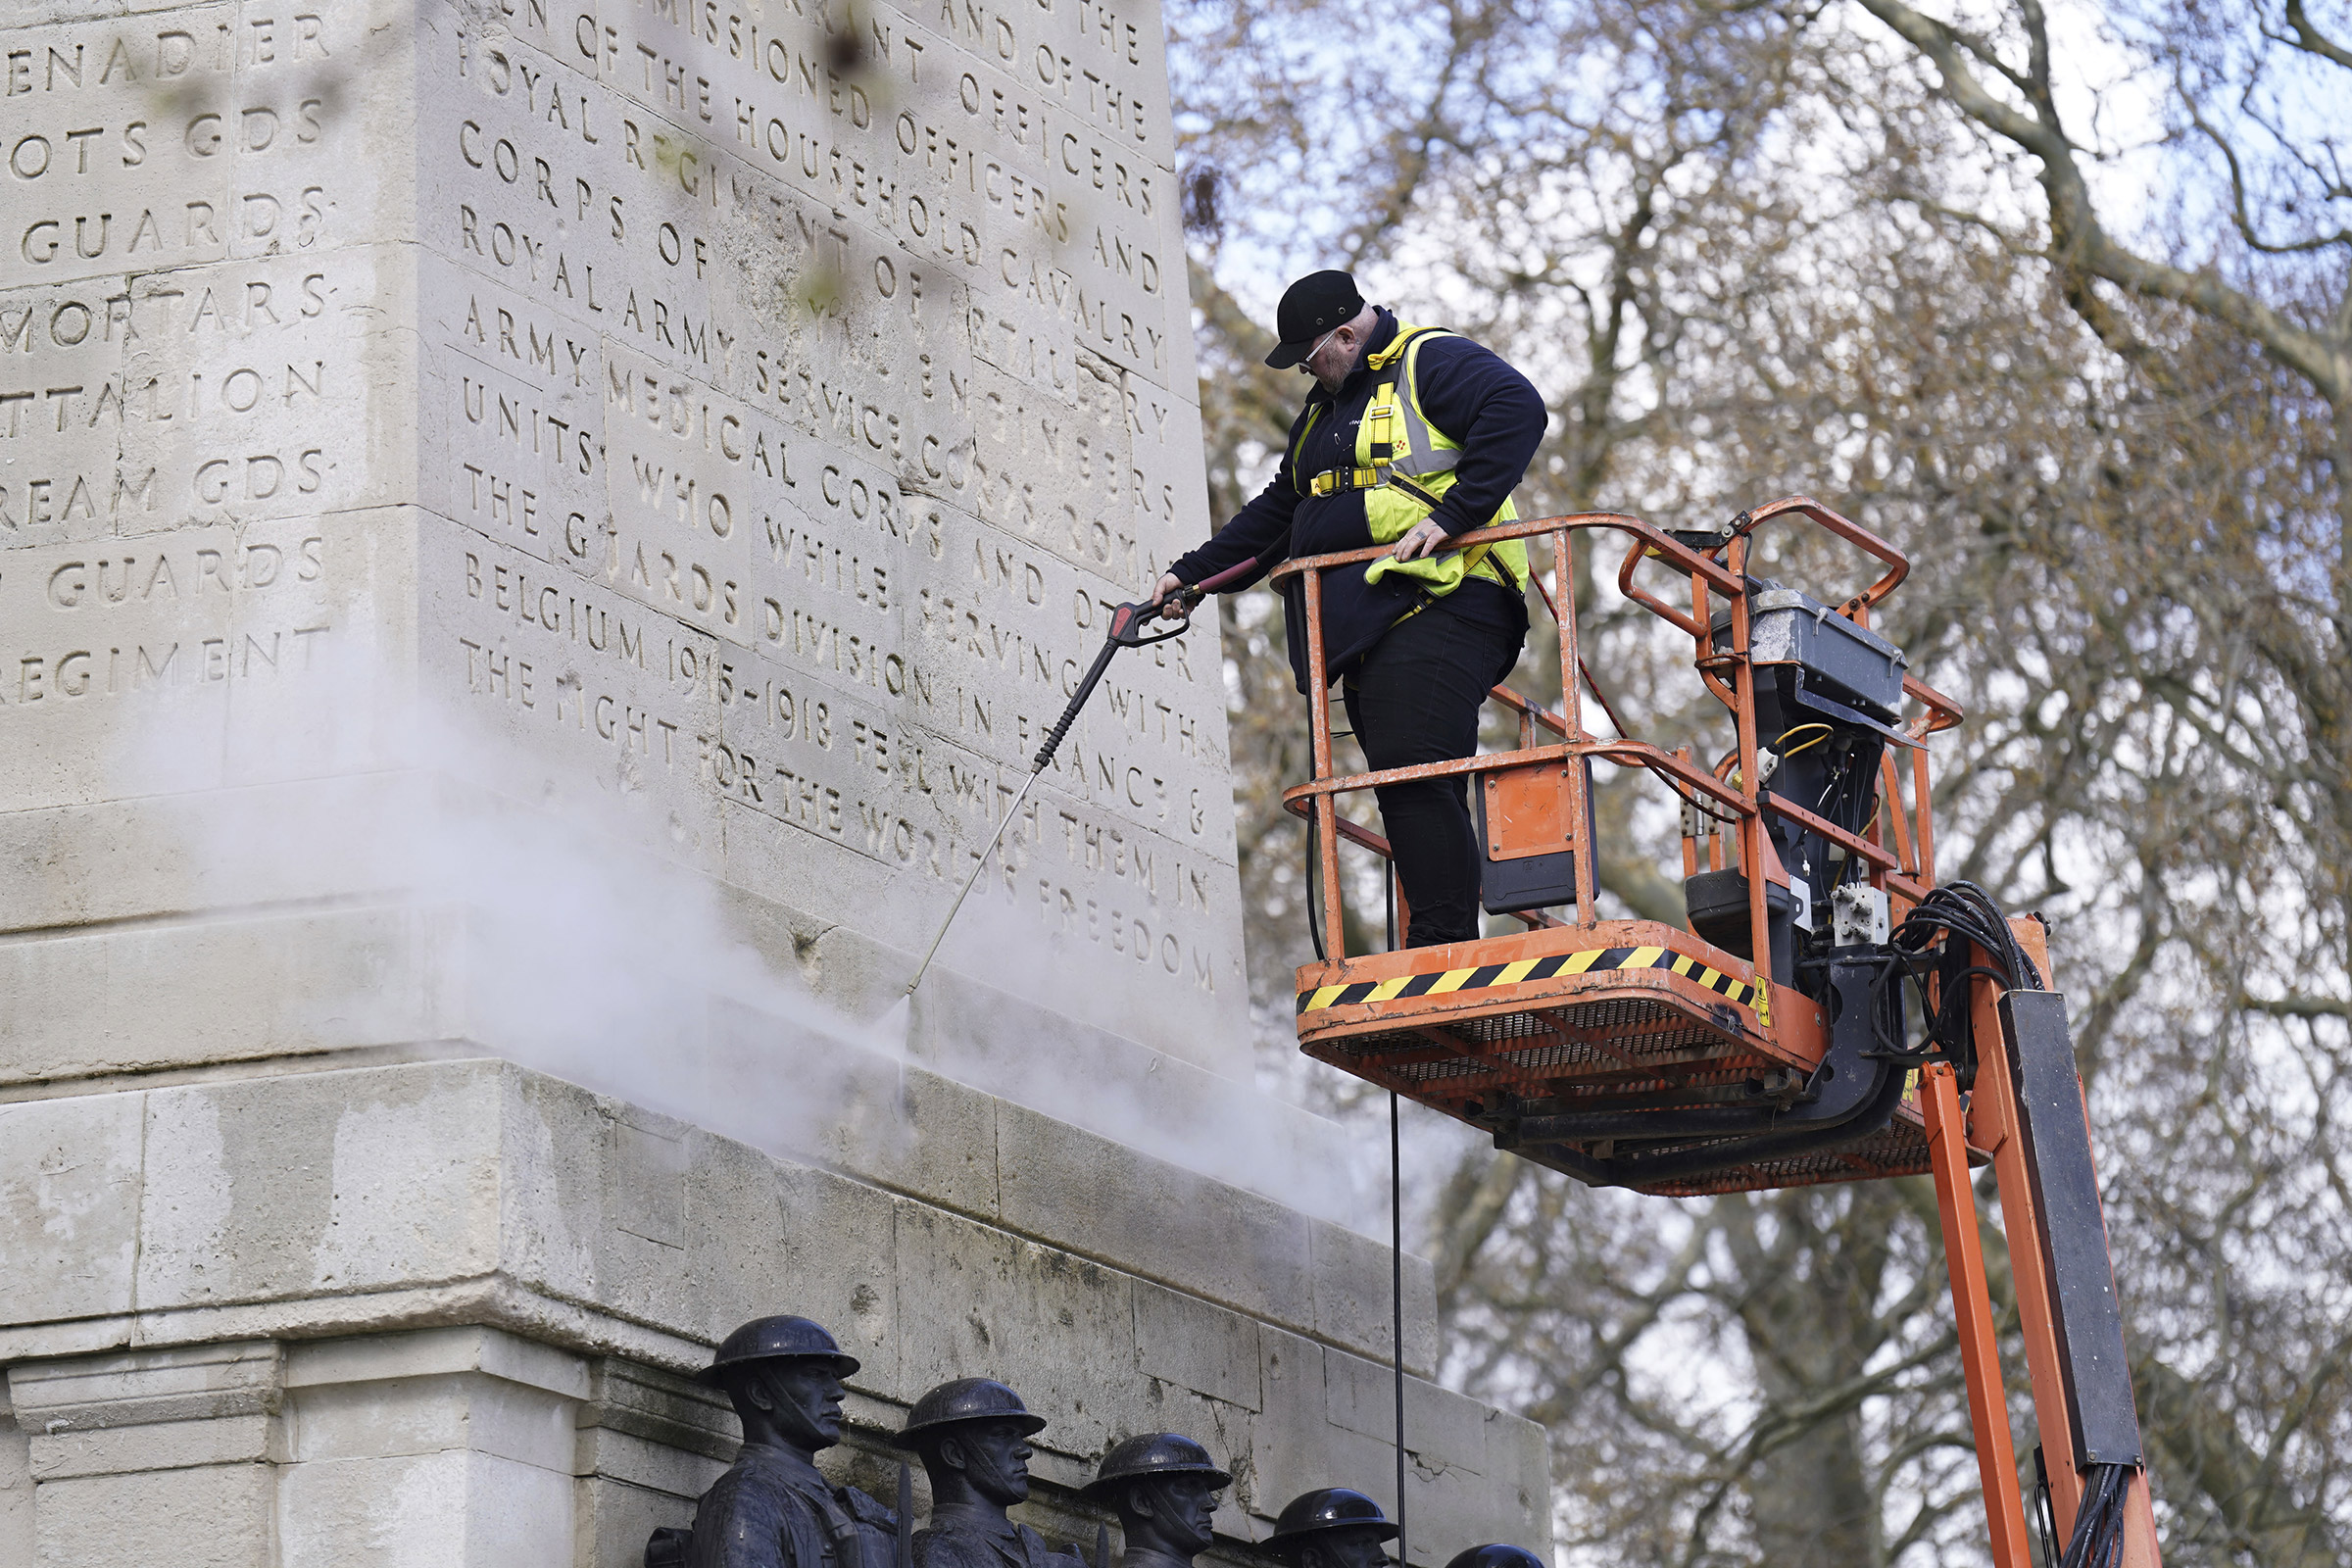 A monument is cleaned near Horse Guards Parade, London, April 13.  (PA Images/AP)